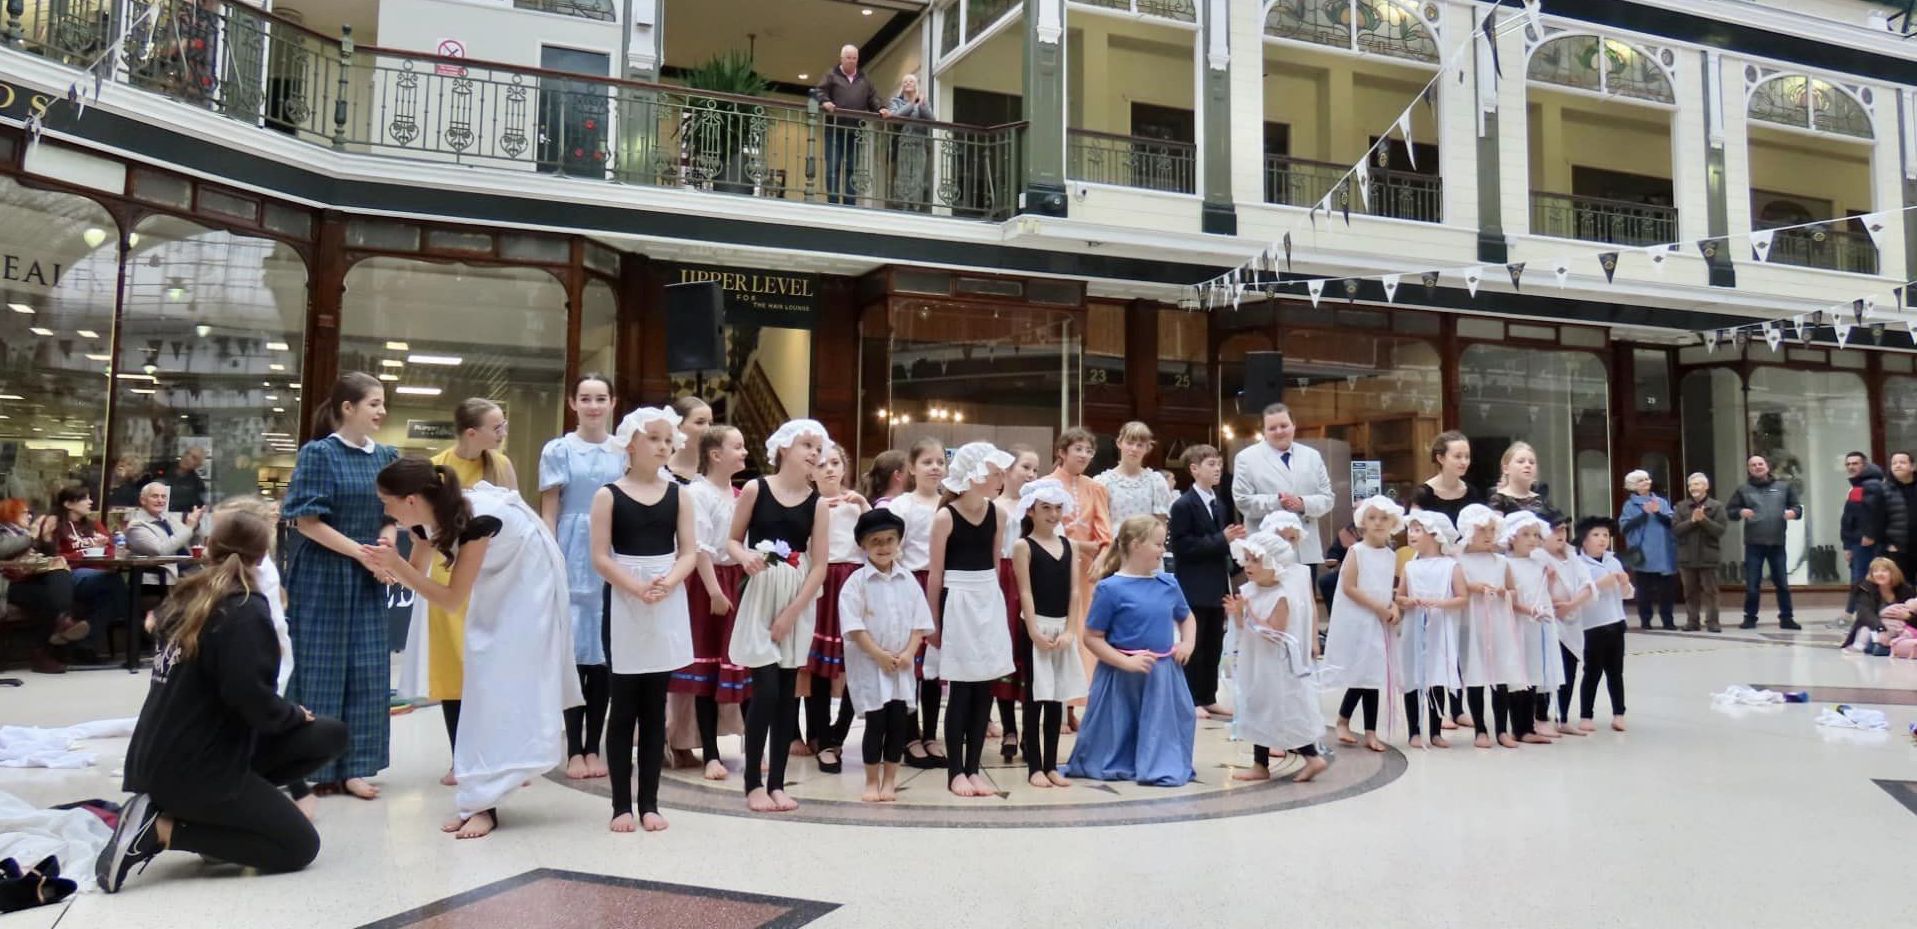 The historic Wayfarers Arcade in Southport has marked its 125h anniversary with a weekend of Victorian celebrations with entertainment from the Gambolling Arena Theatre Company and Wrights Performing Arts. Photo by Andrew Brown Stand Up For Southport